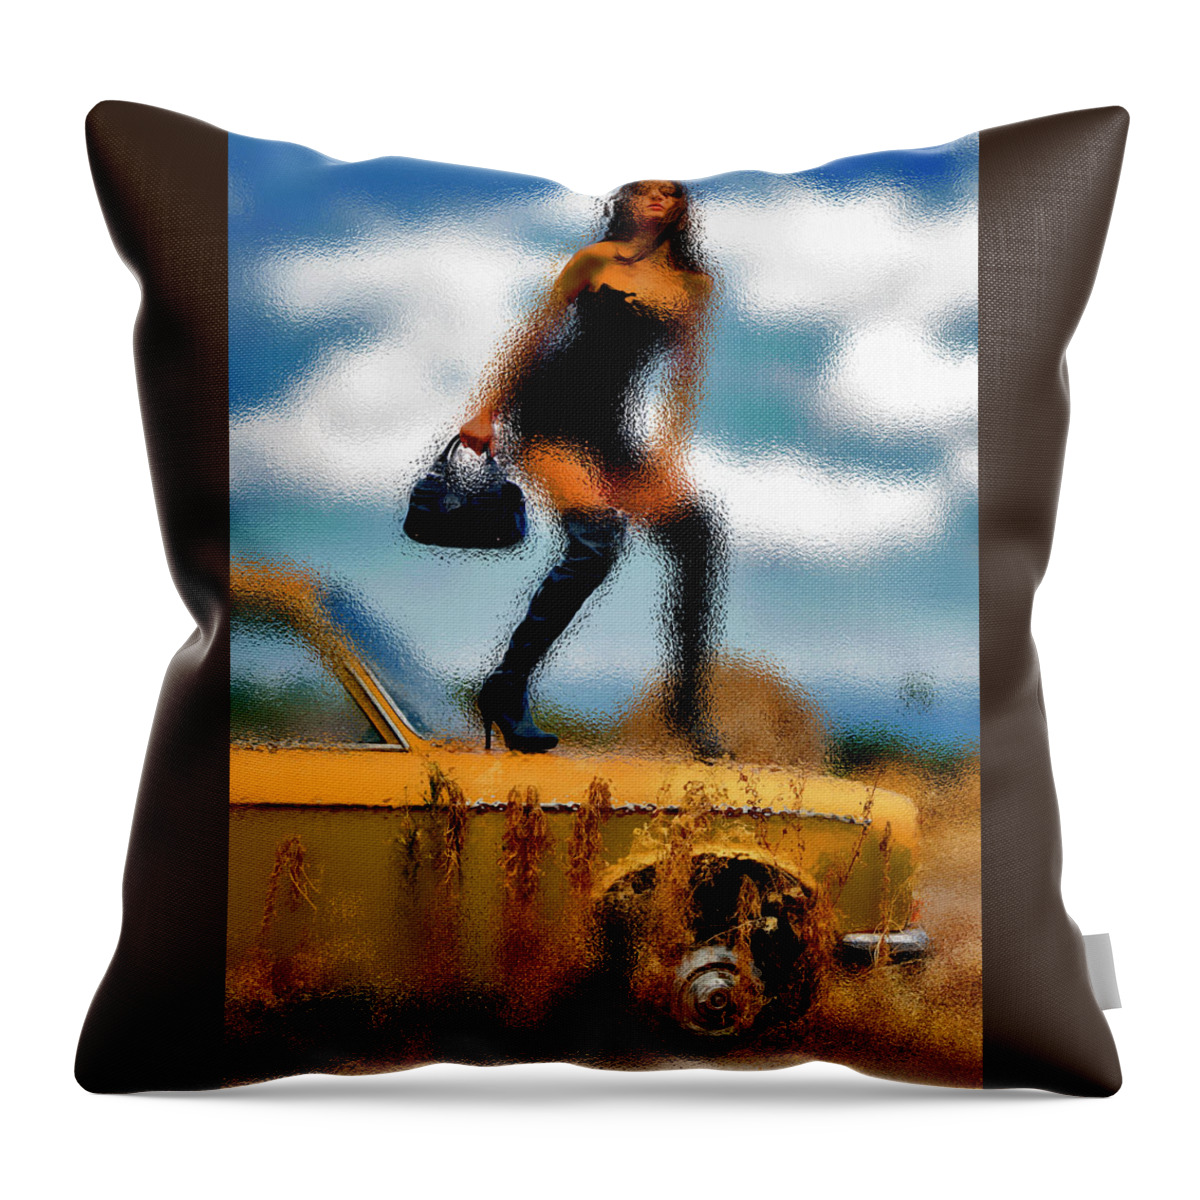 Abandoned Throw Pillow featuring the photograph Woman on abandoned car by Al Fio Bonina